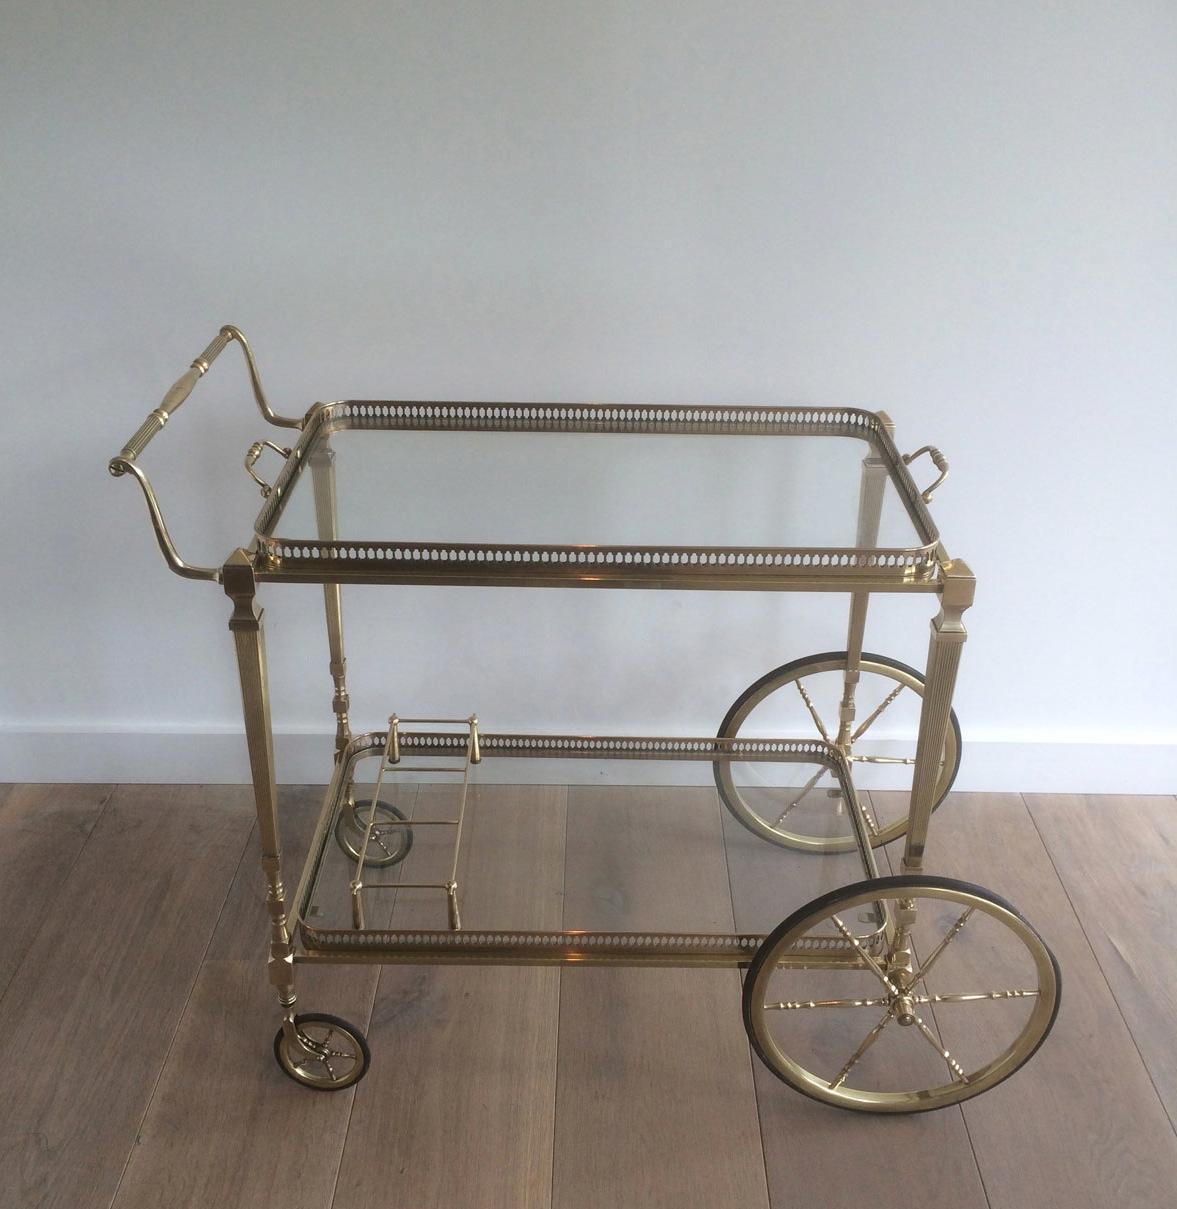 This very elegant neoclassical style drinks trolley is made of brass with removable trays made of a glass shelf surrounded by an openwork brass gallery. This is a French work by Maison Jansen. Circa 1940